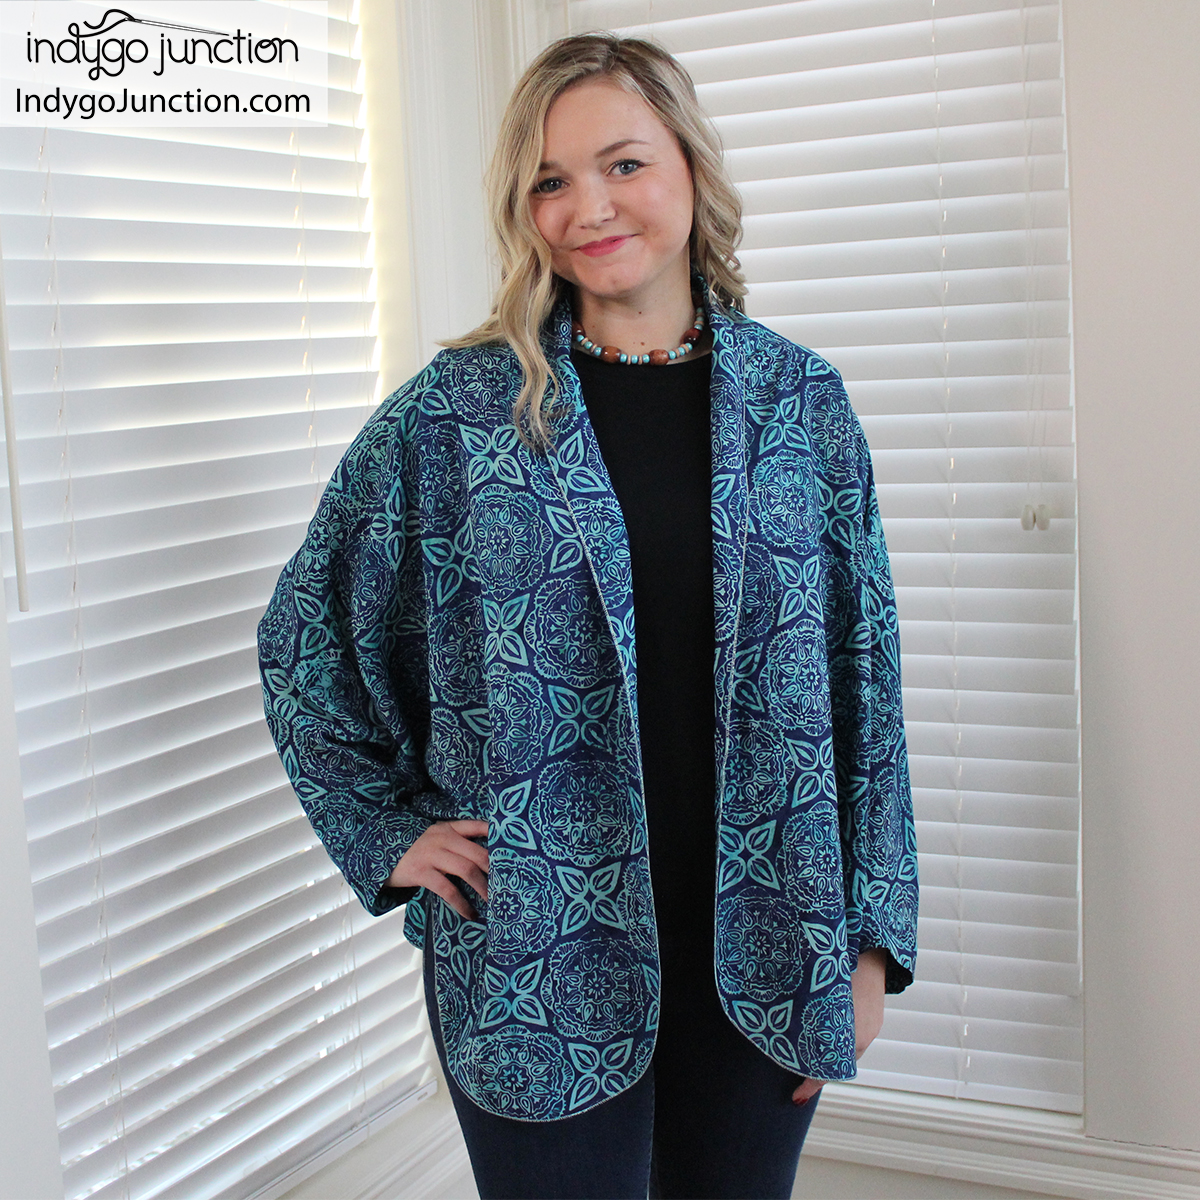 Sewing with Rayon: Tips and Tricks – Missouri Star Blog